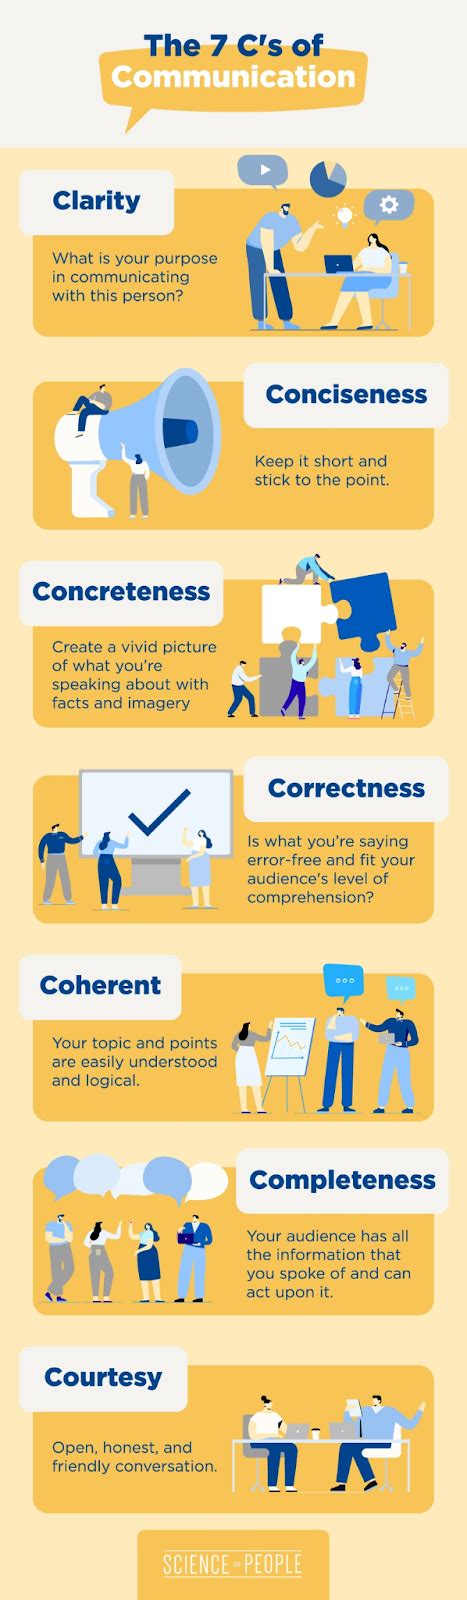 10 Effective Ways You Can Improve Your Communication Skills